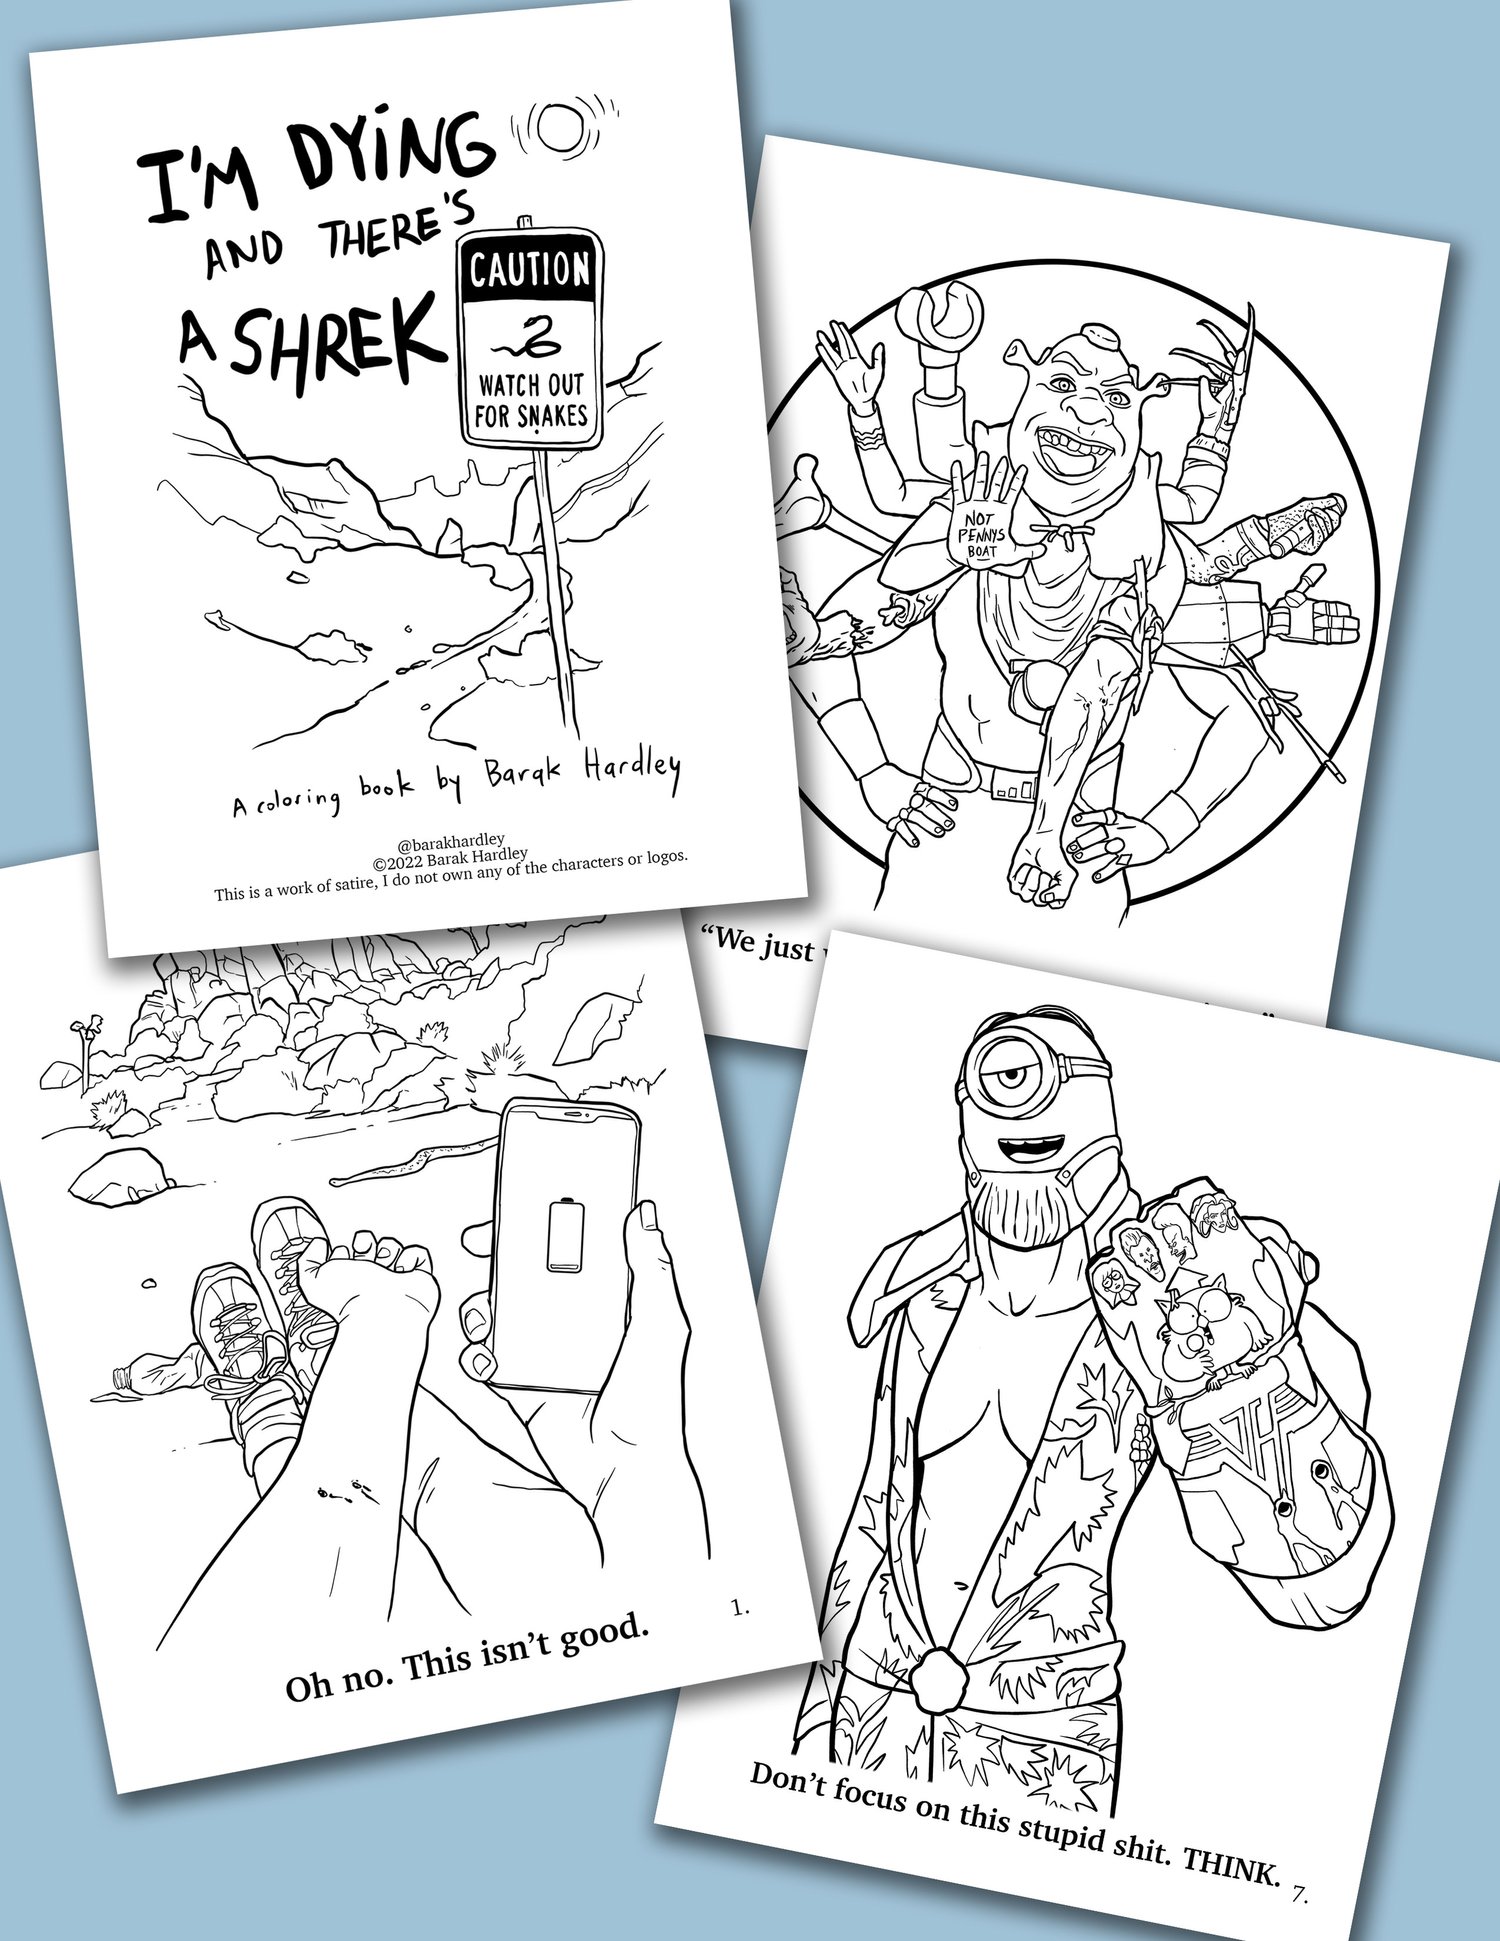 Im dying and theres a shrek coloring book â barak hardley